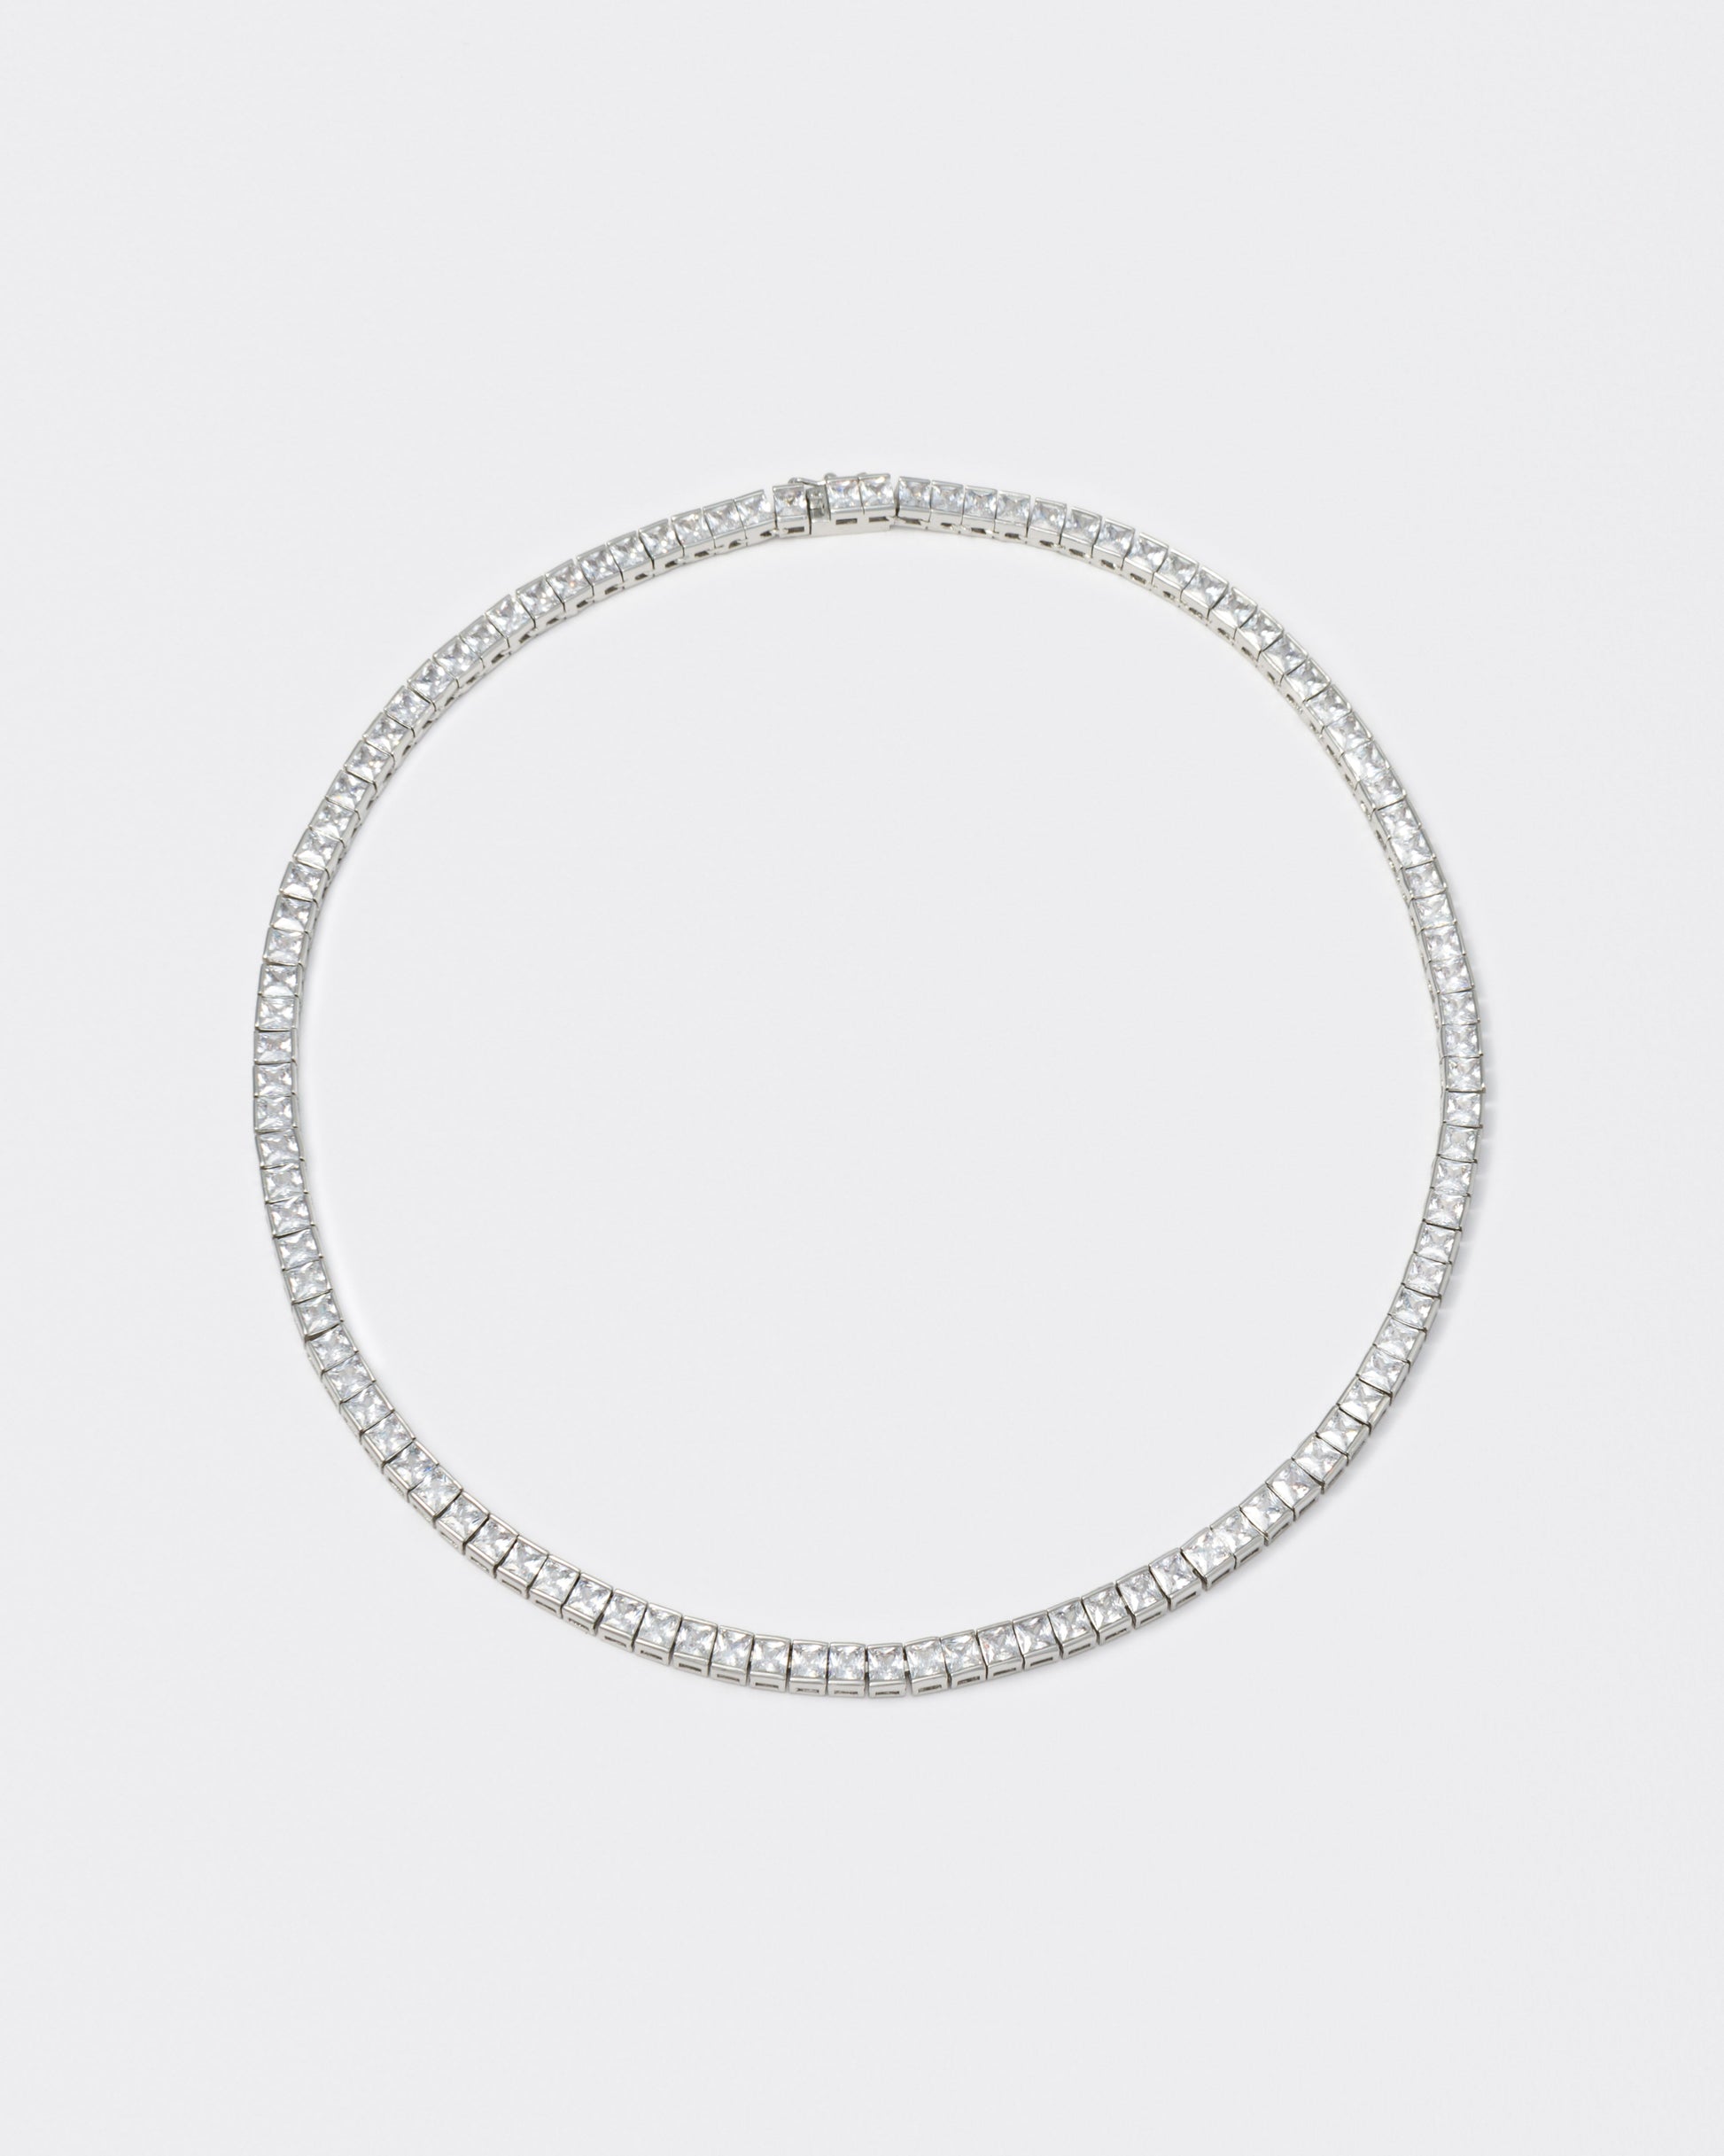 18k white gold coated tennis chain necklace with hand-set princess-cut stones in white